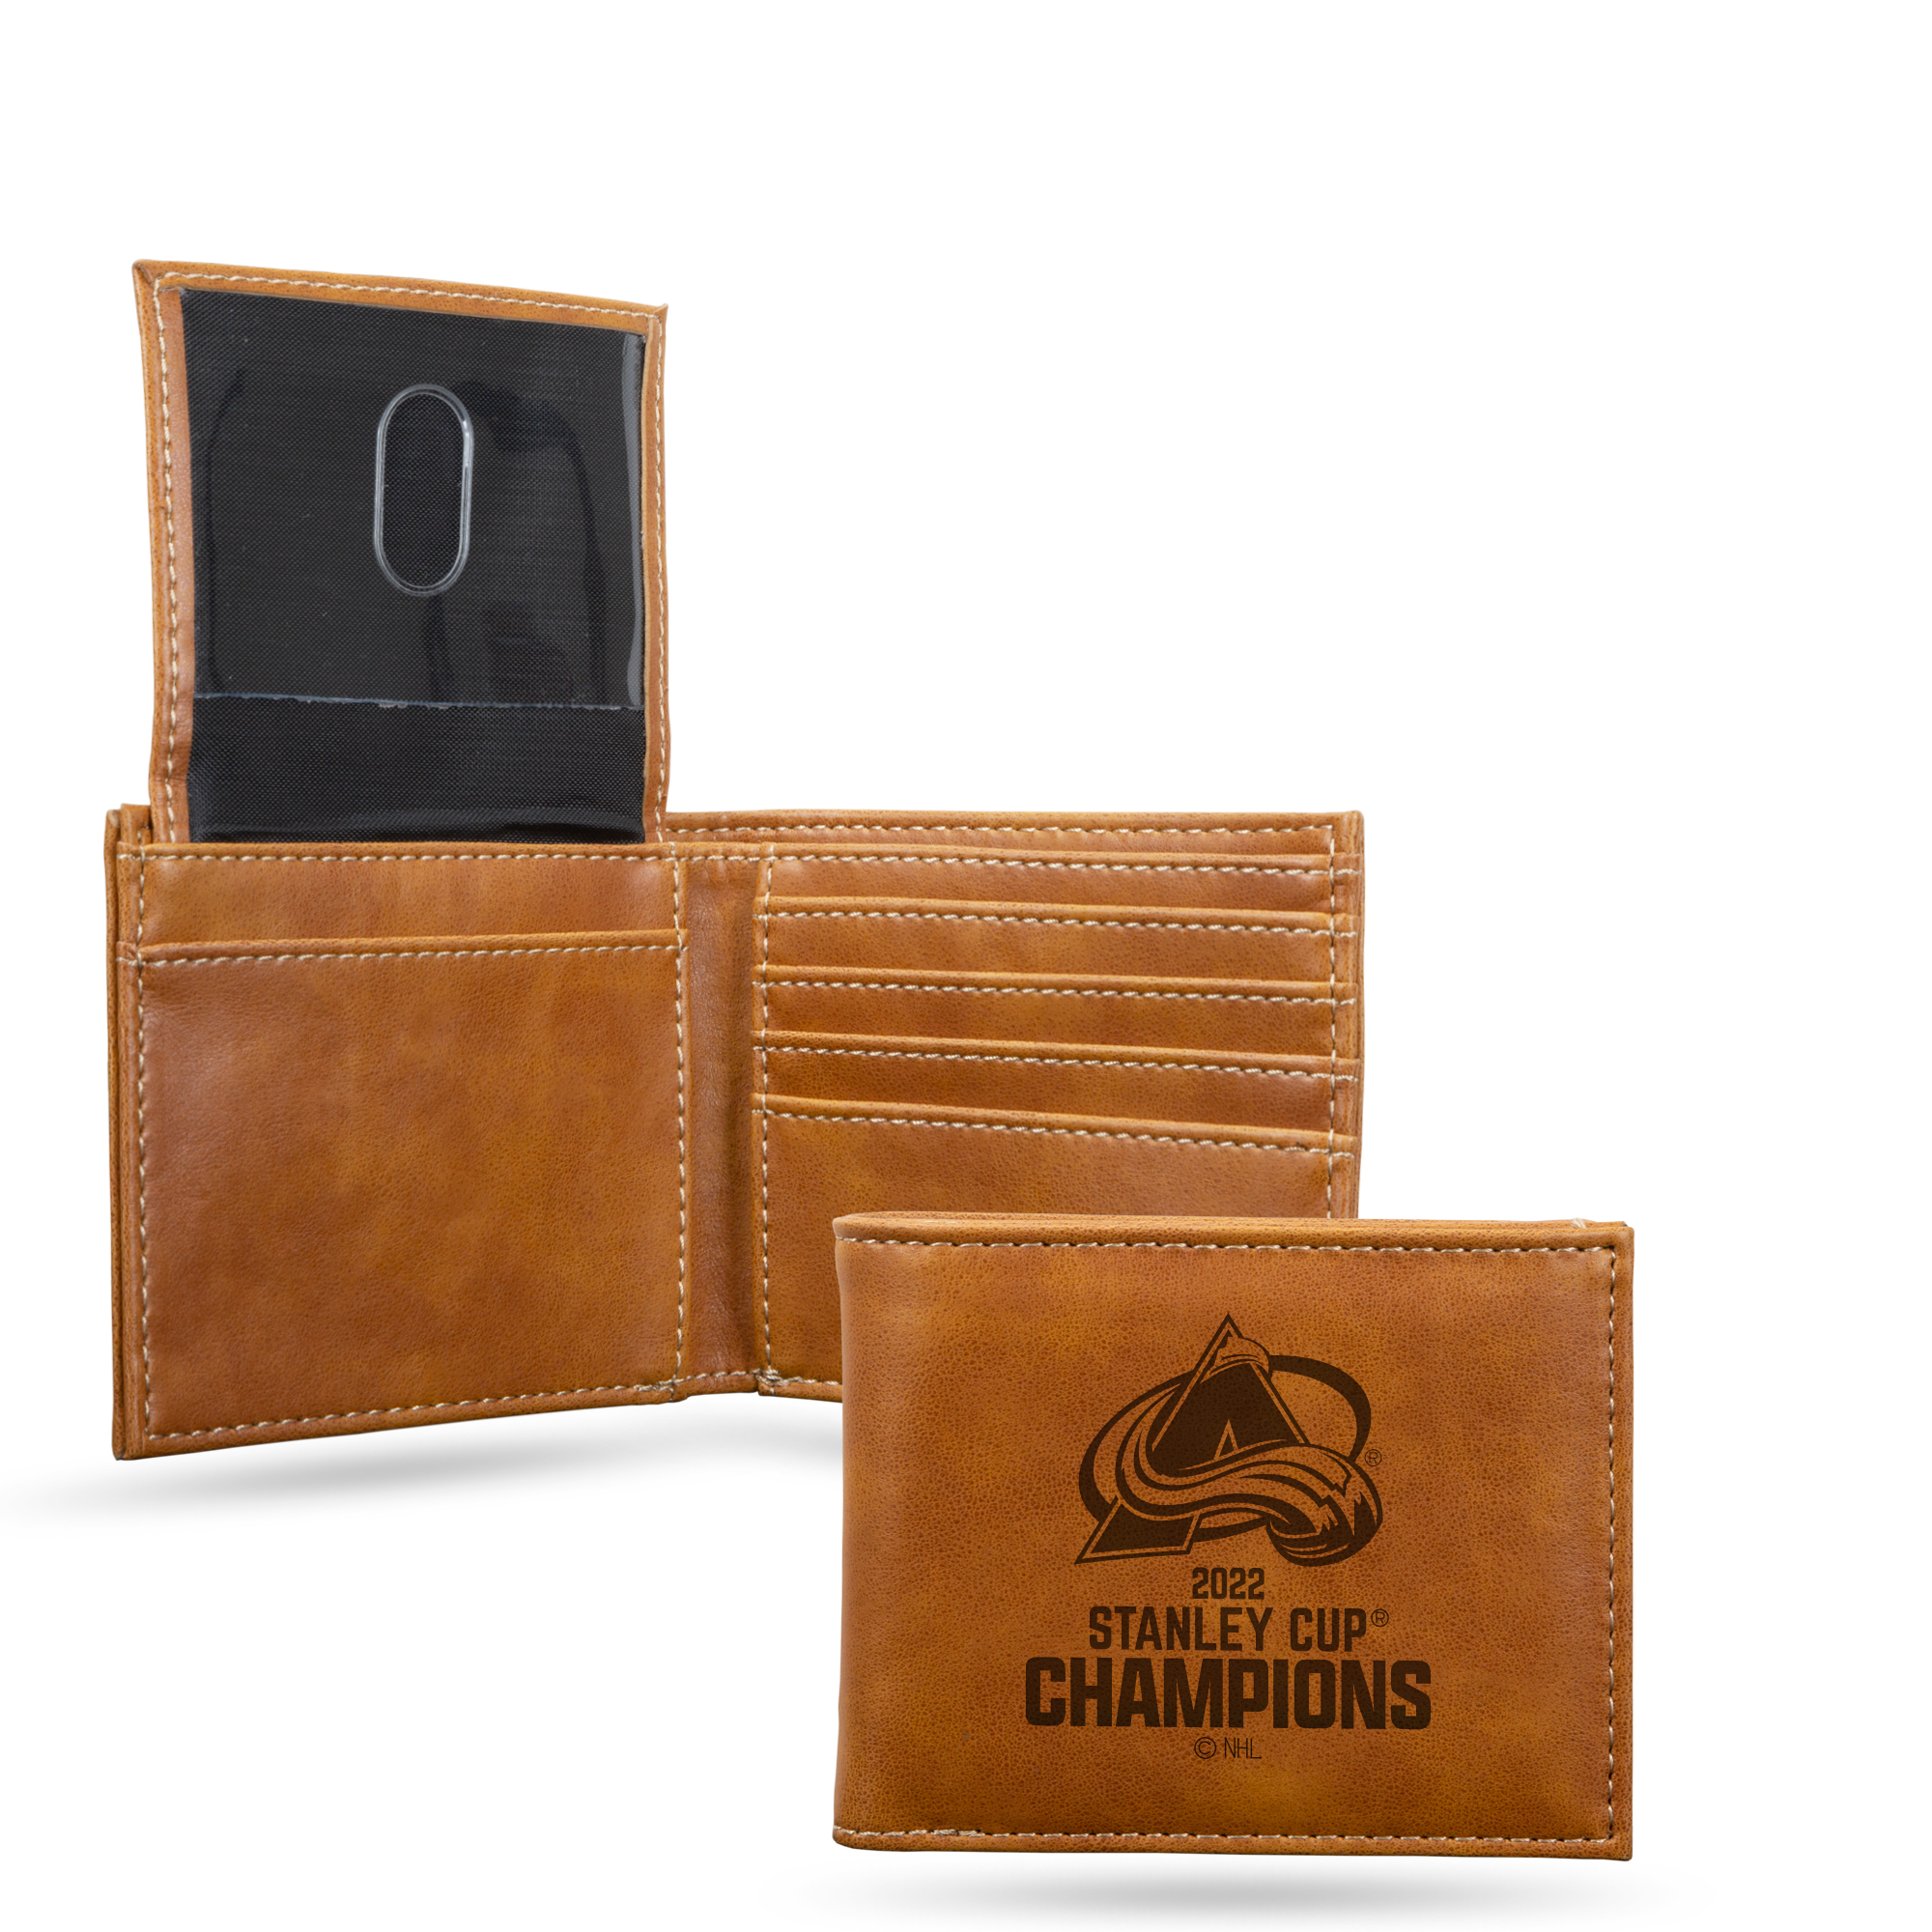 Rico NHL Rico Industries Colorado Avalanche 2022 Stanley Cup Champions Laser Engraved Billfold Wallet